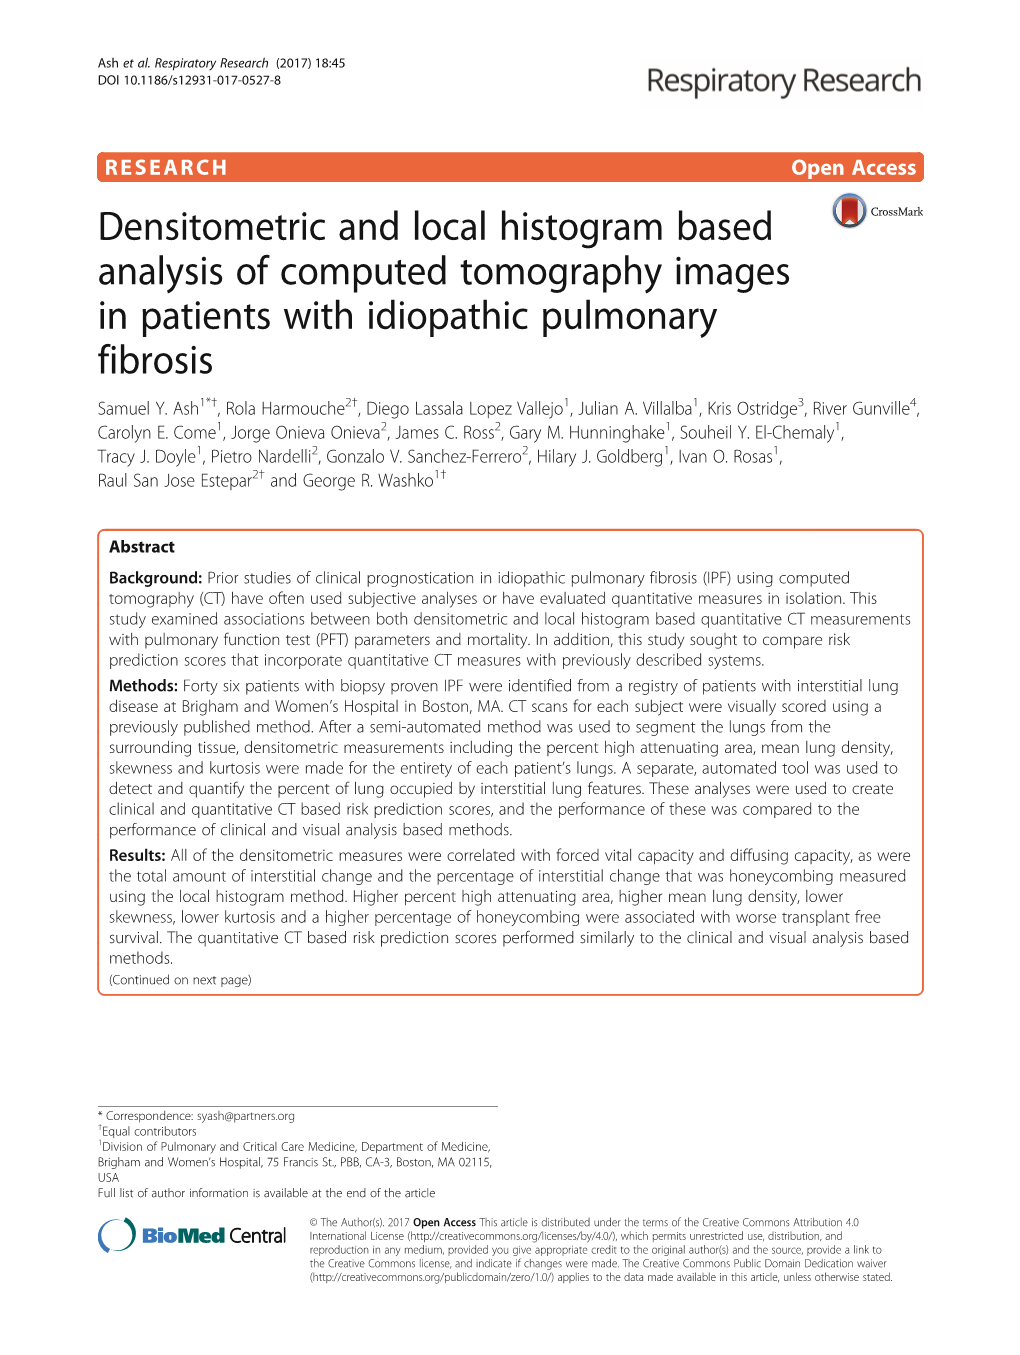 Densitometric and Local Histogram Based Analysis of Computed Tomography Images in Patients with Idiopathic Pulmonary Fibrosis Samuel Y